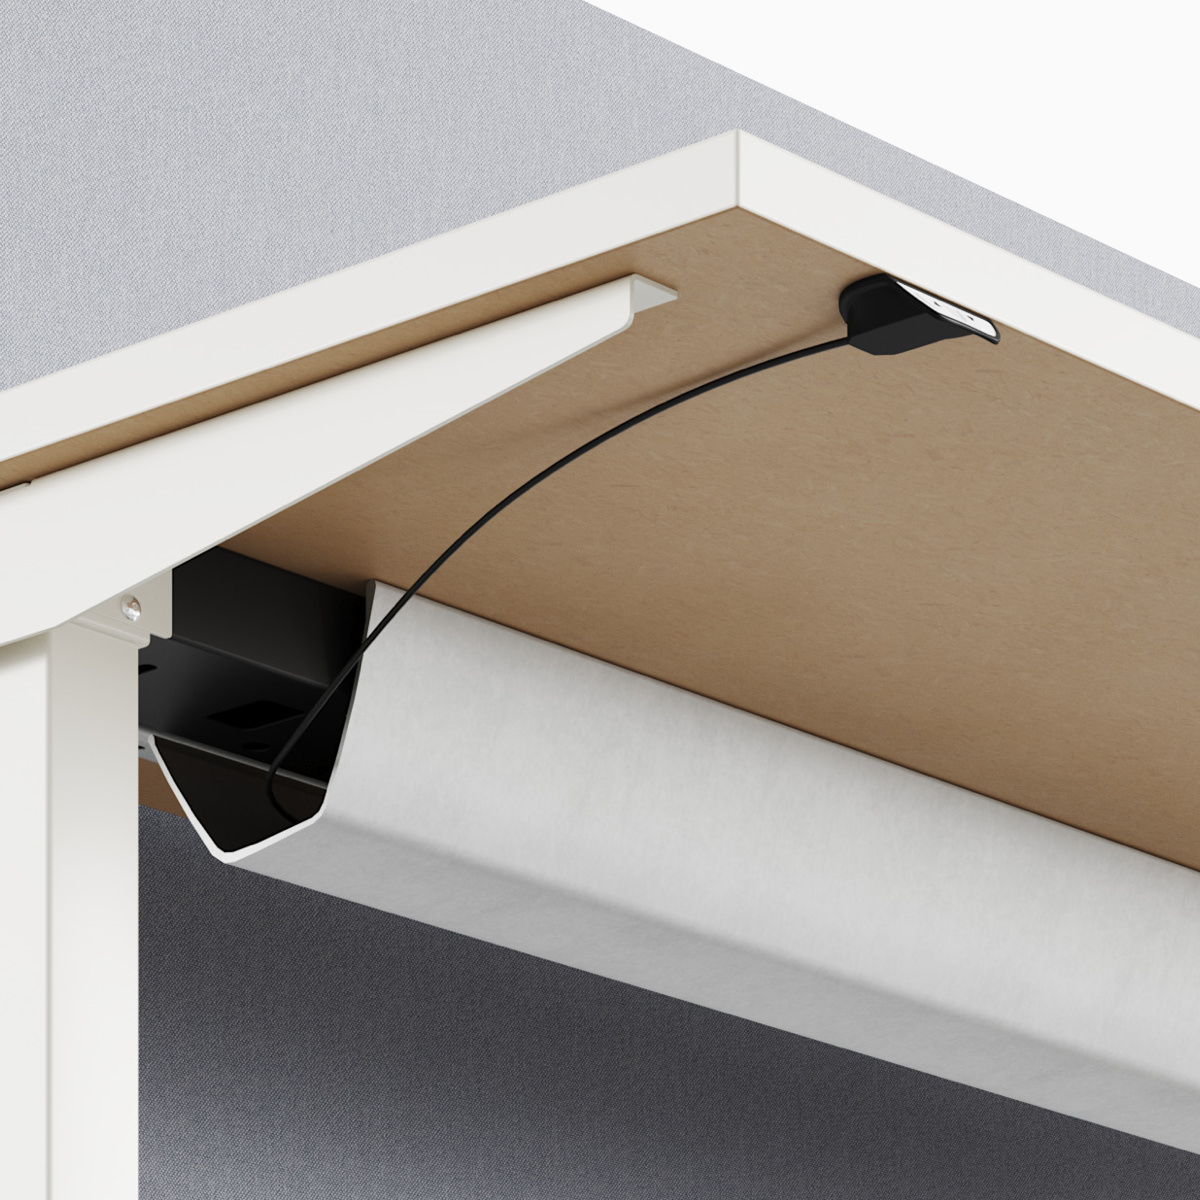 A close-up view of Nevi standing desk's under-surface cable management.